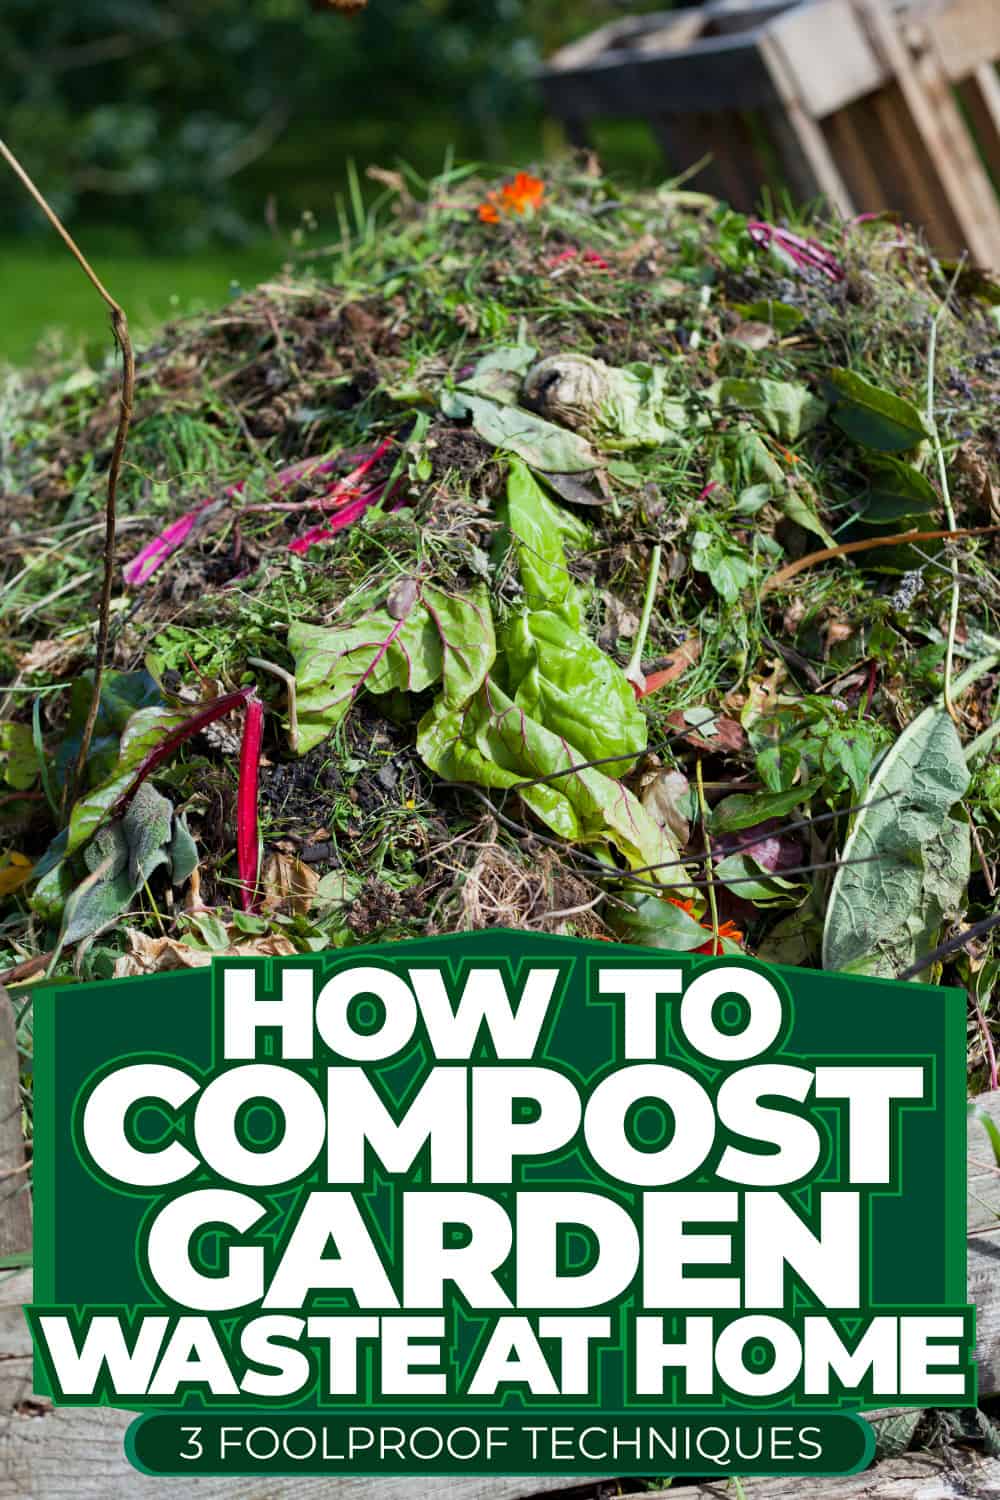 How To Compost Garden Waste At Home [3 Foolproof Techniques]
